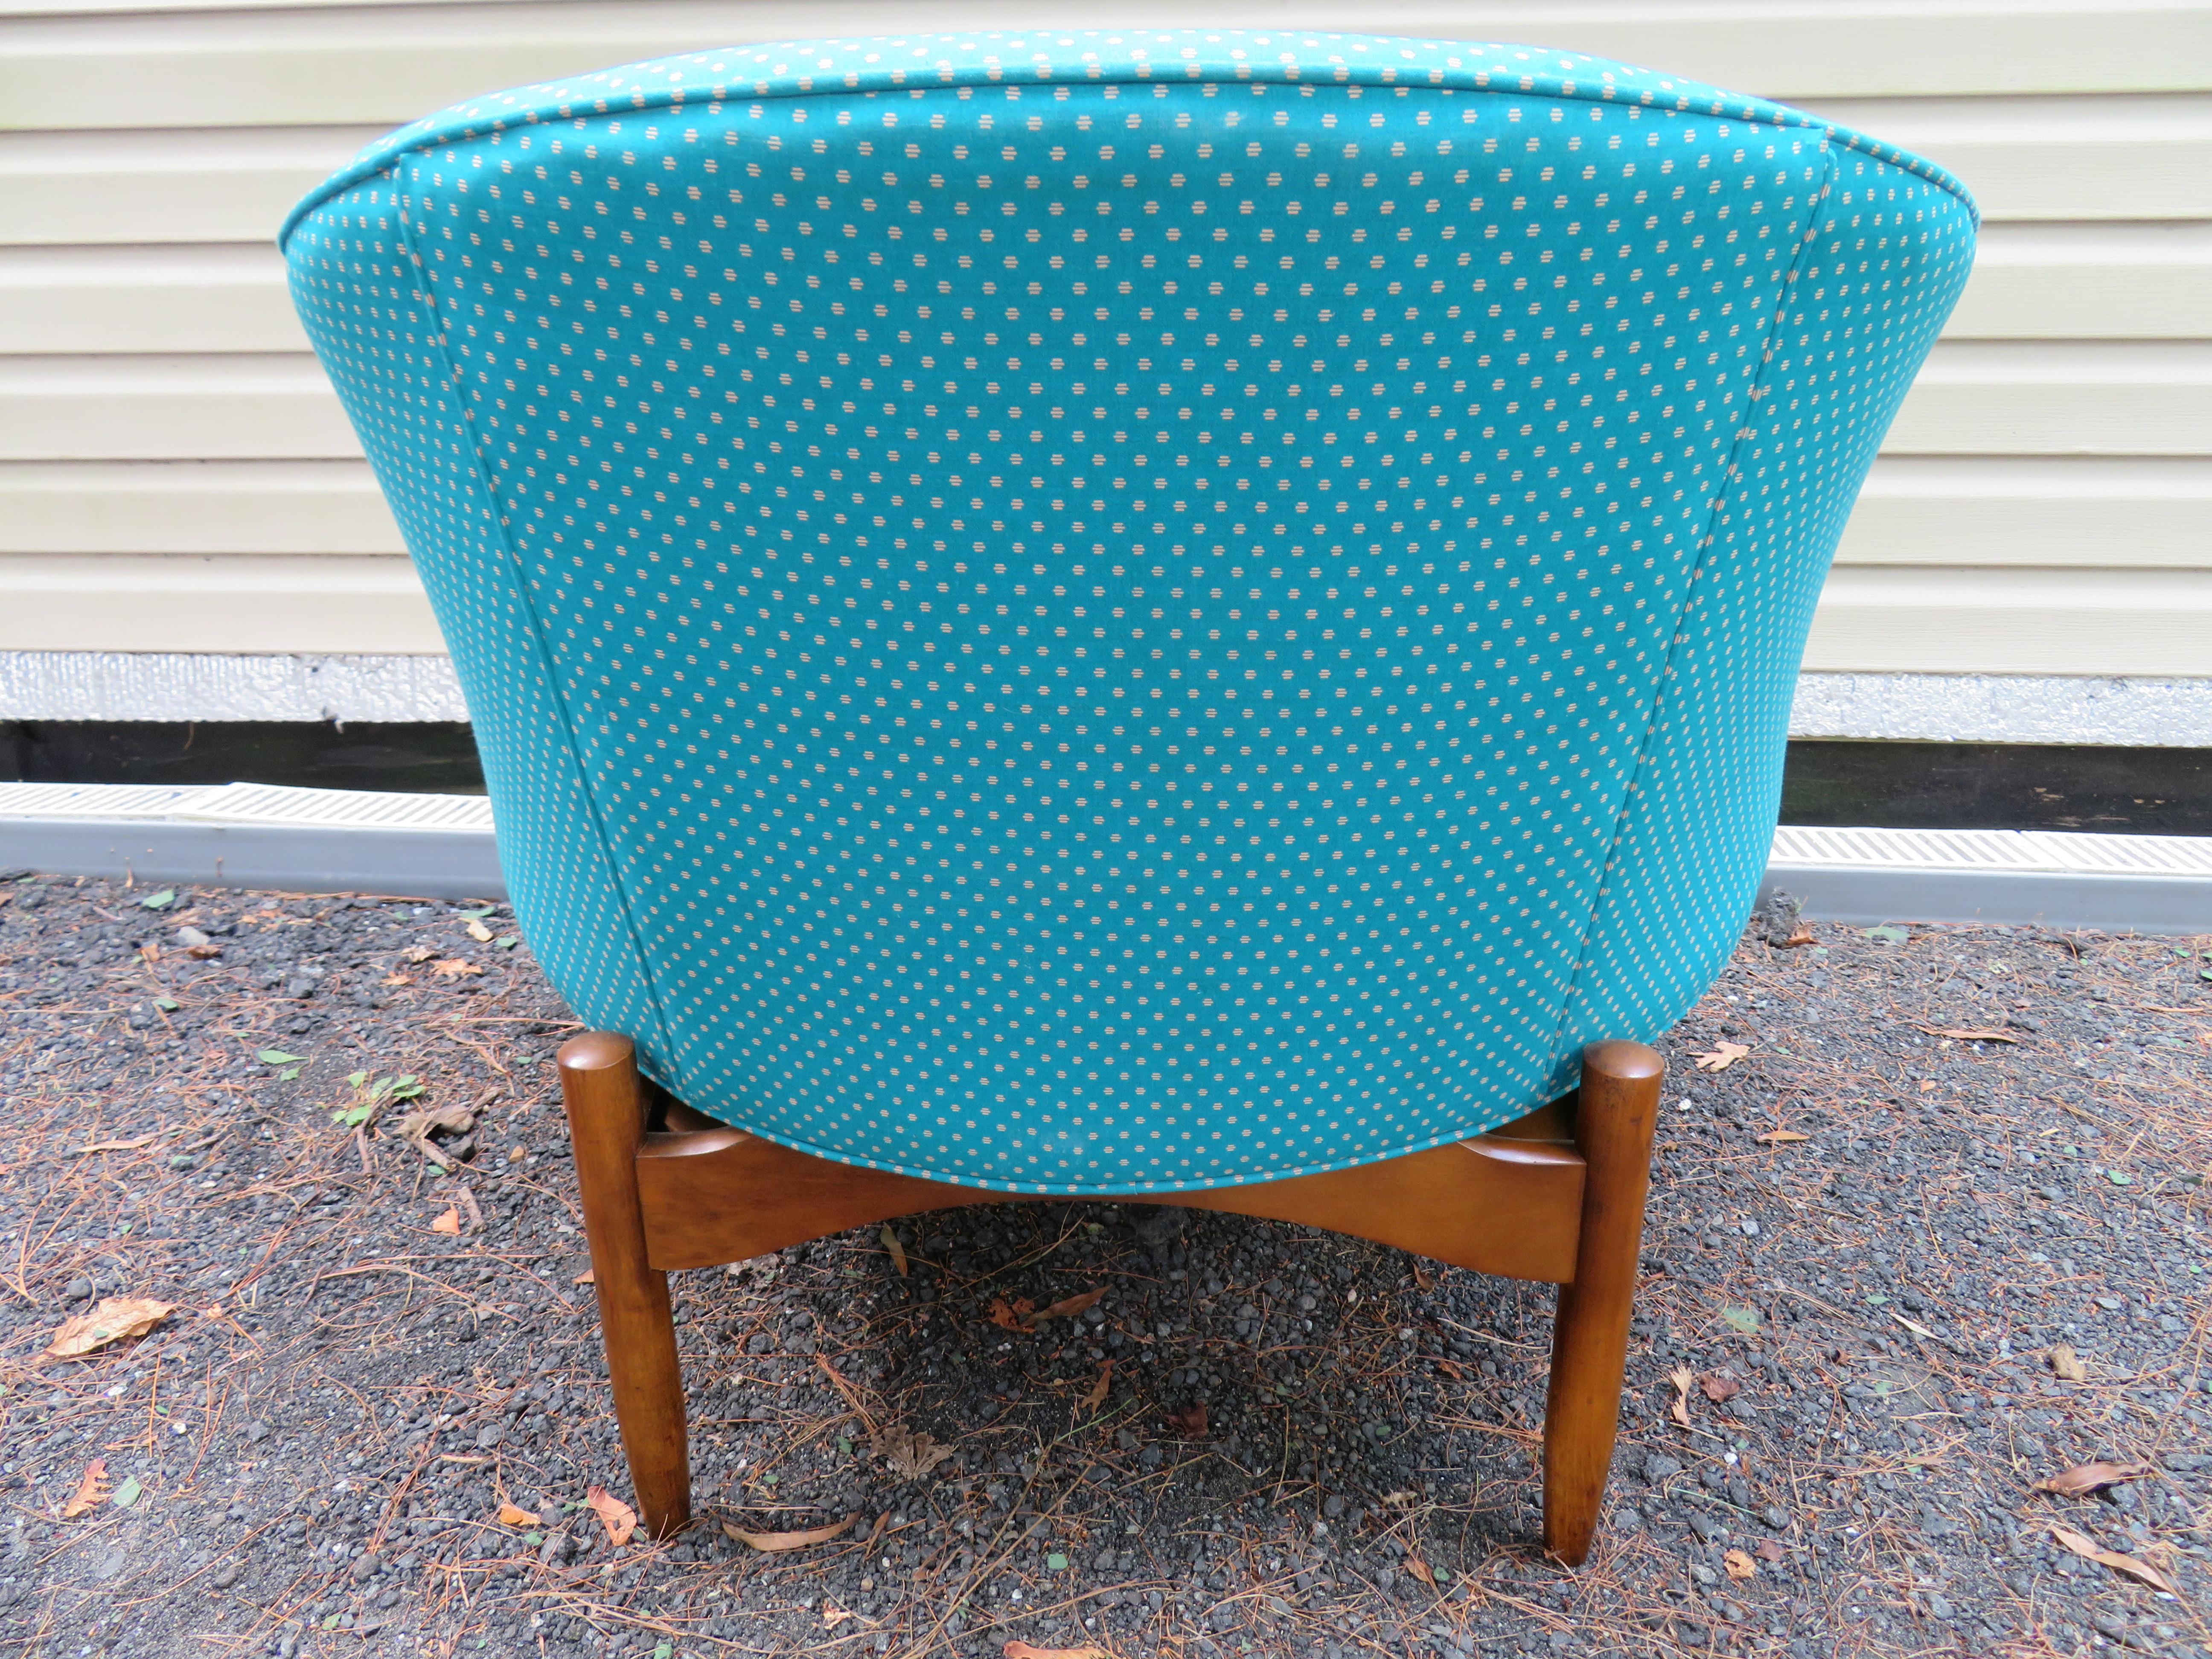 Very uncommonly seen club chair designed by Lawrence Peabody. This is a great wide comfortable lounge chair, circa 1960s. It features a sculptural walnut base and Classic barrel back tub chair design. The chair is structurally sound but needs to be